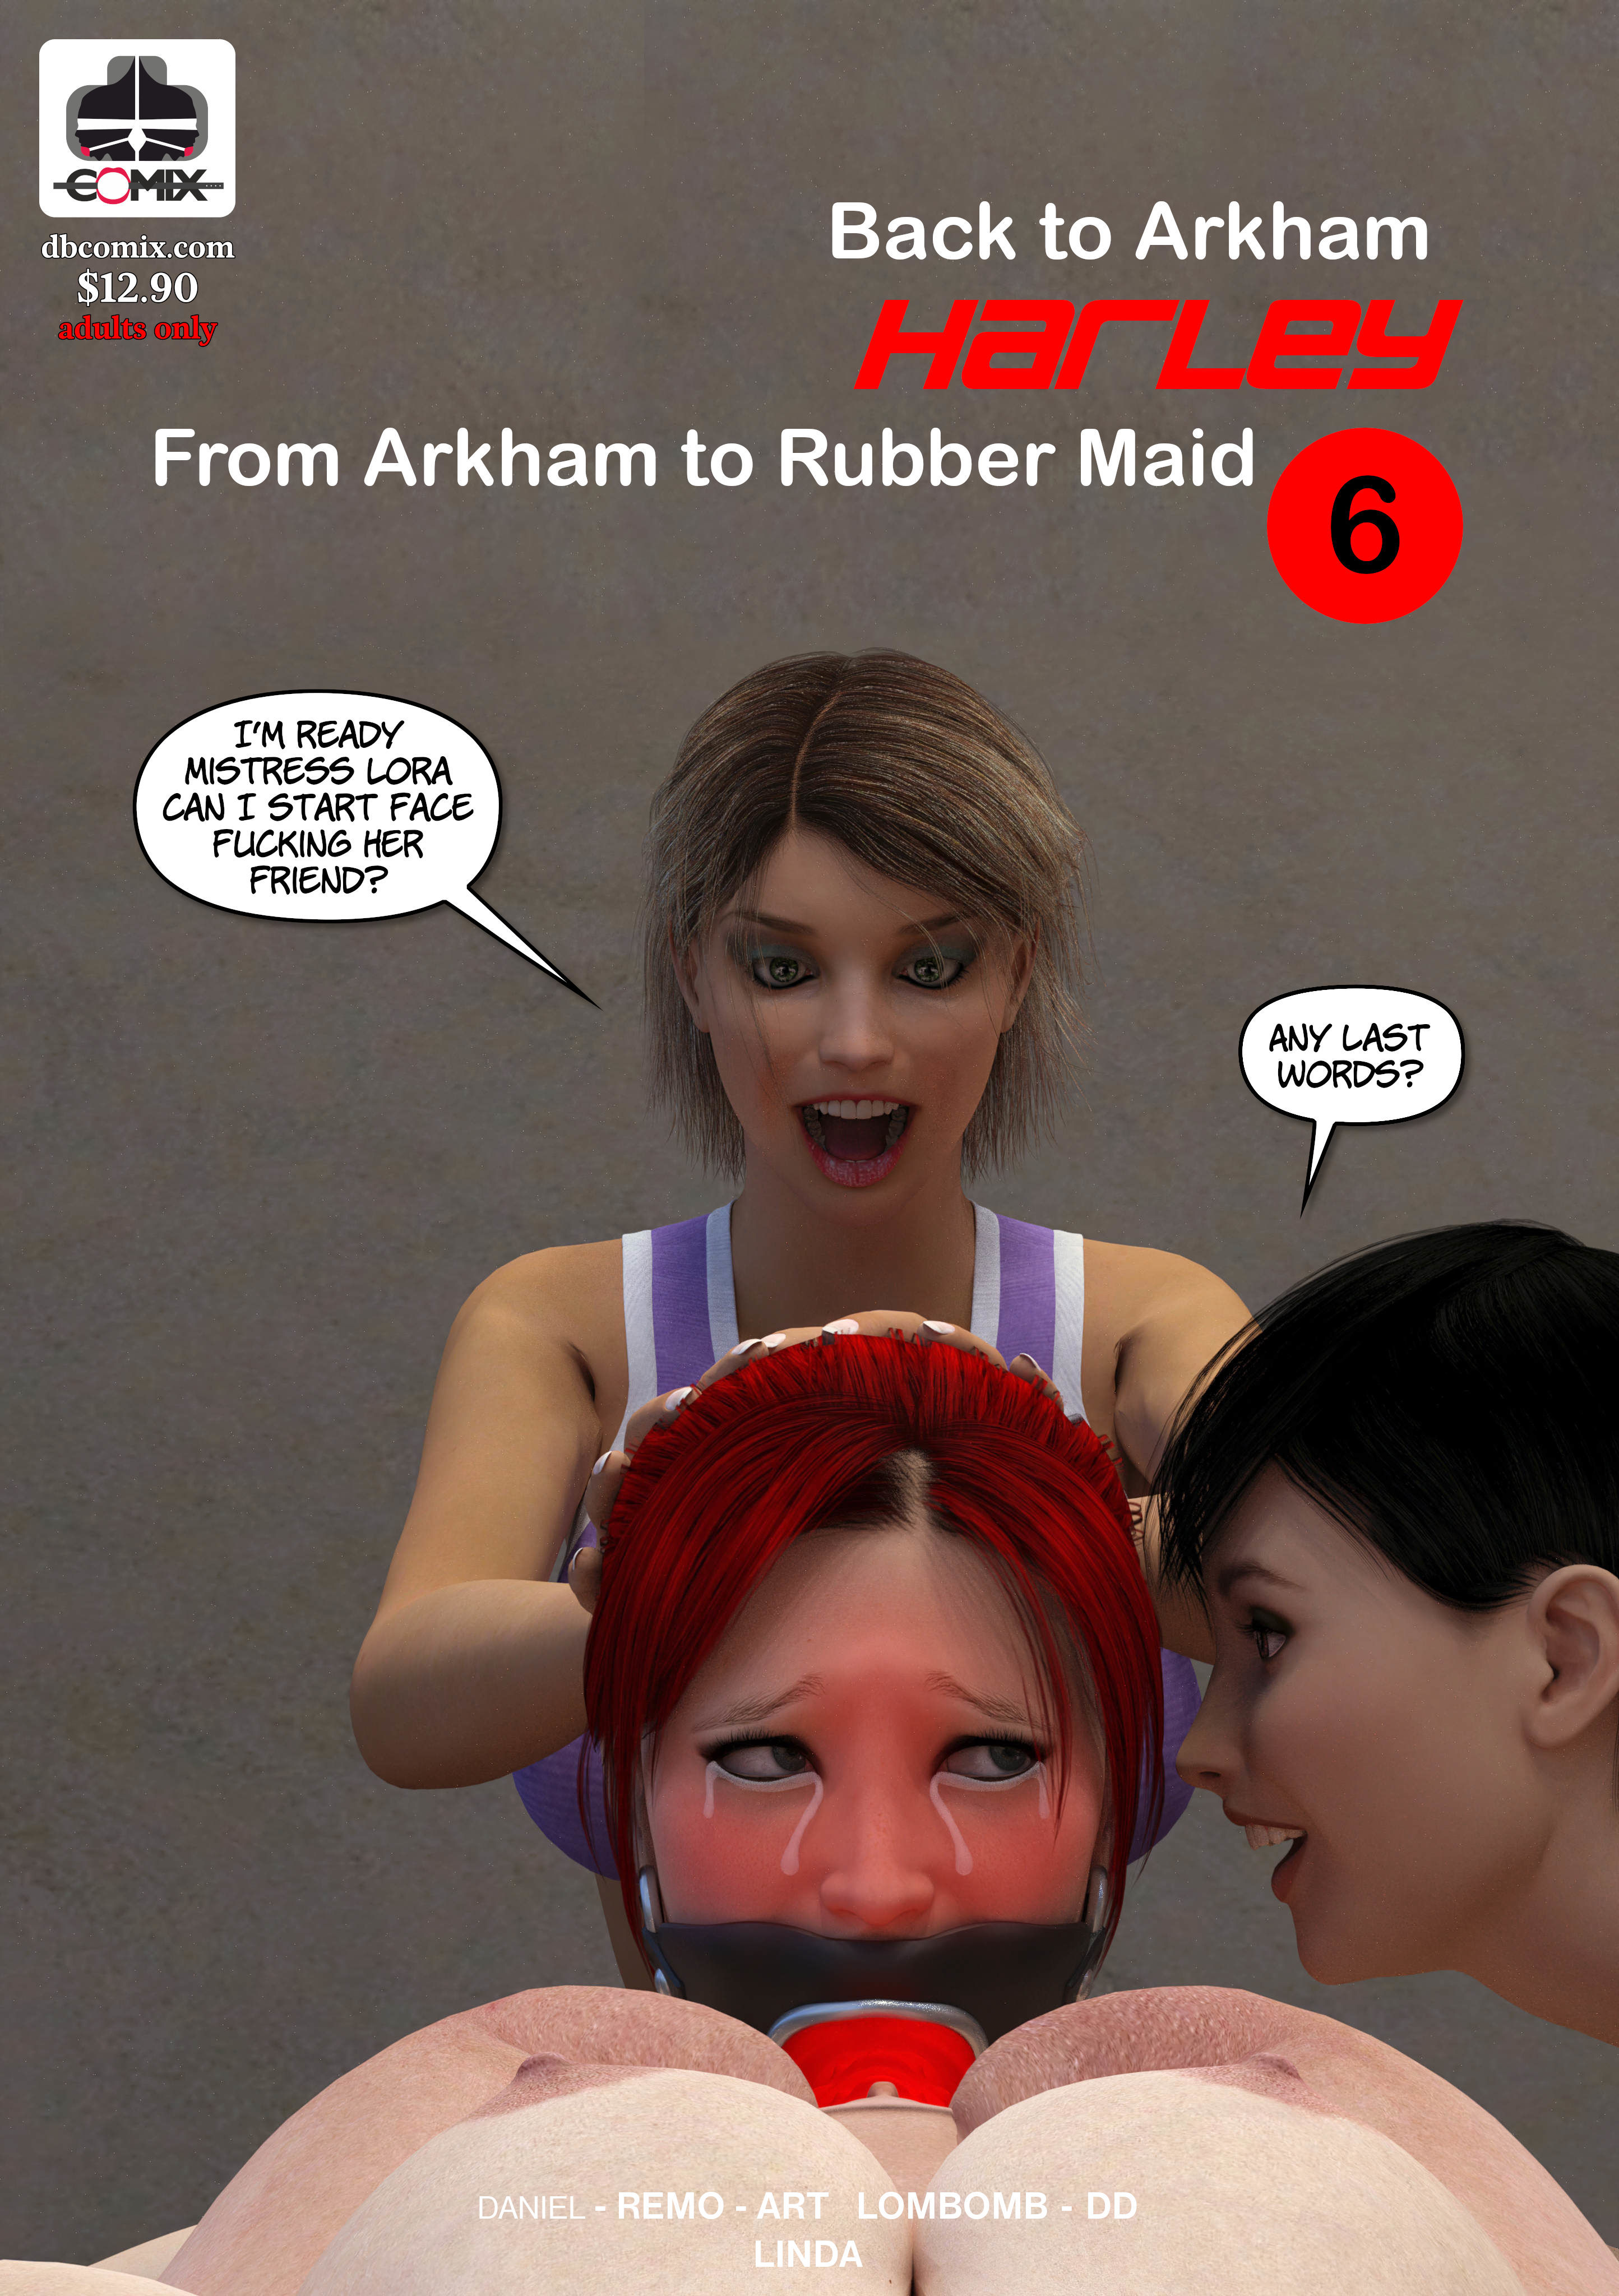 Harley From Akrham to Rubber Maid 6.jpg